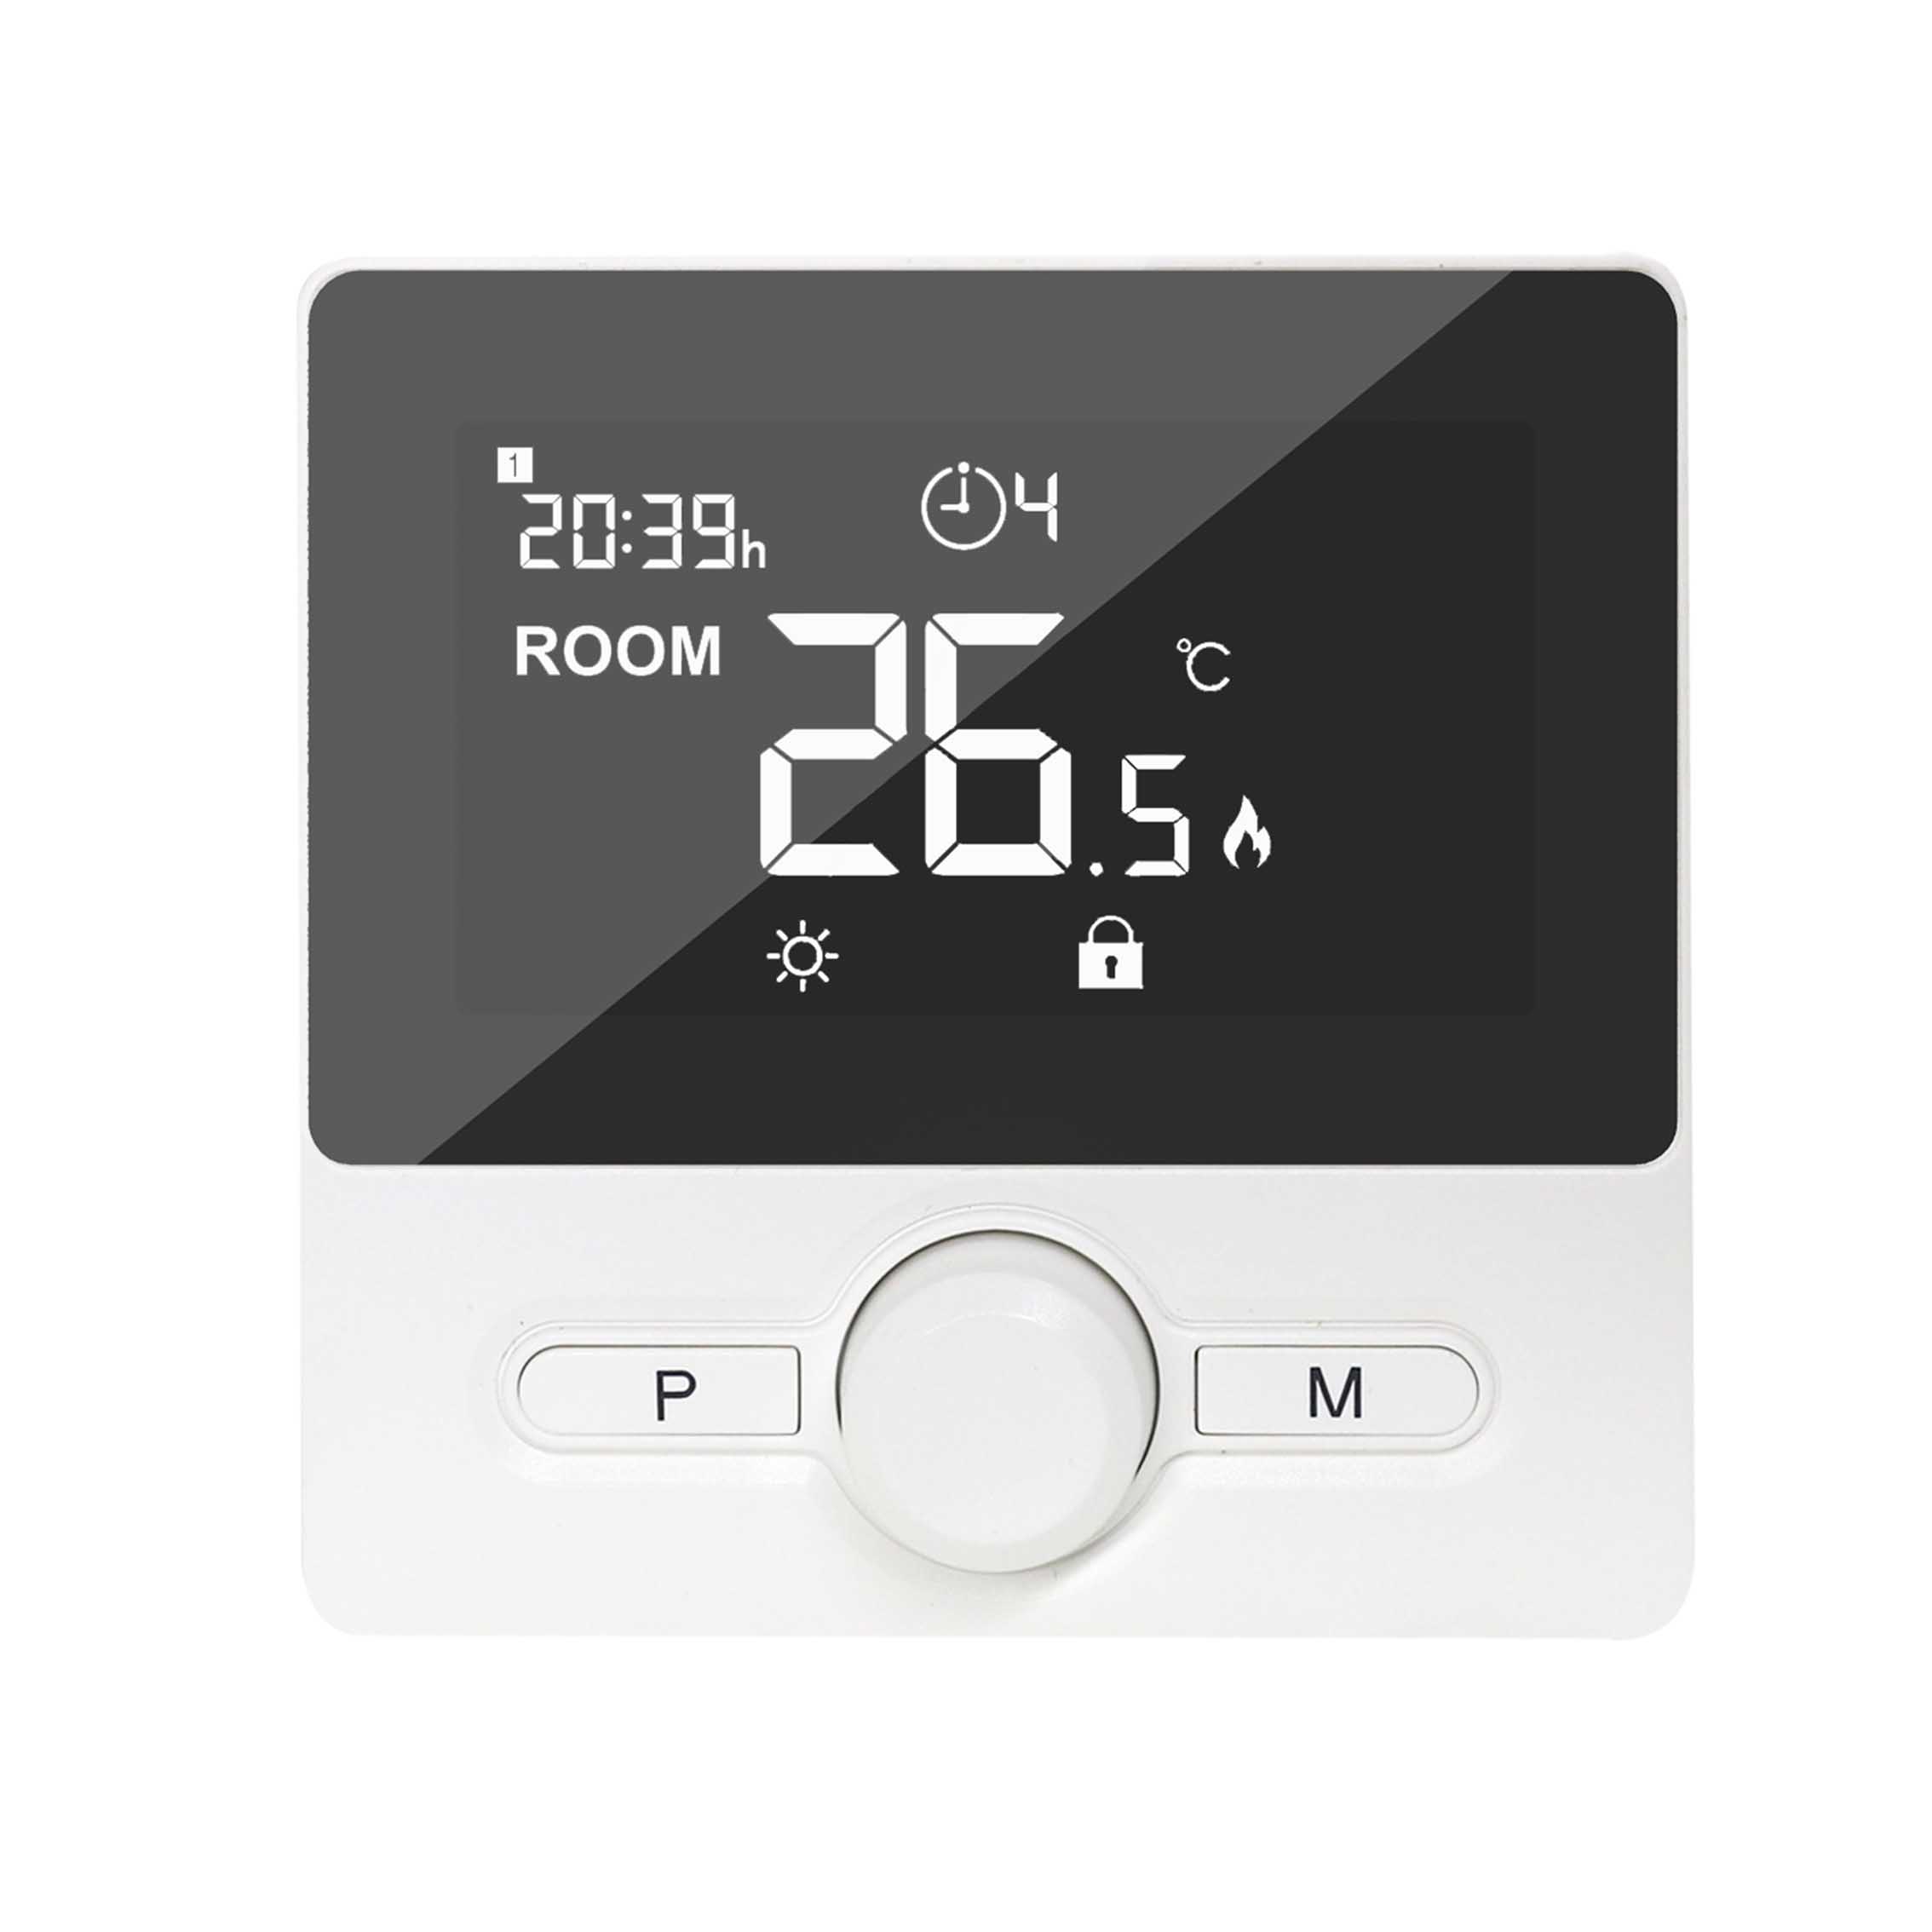 Smart Home WiFi Thermostat Gas Boiler Water Room Central Heating